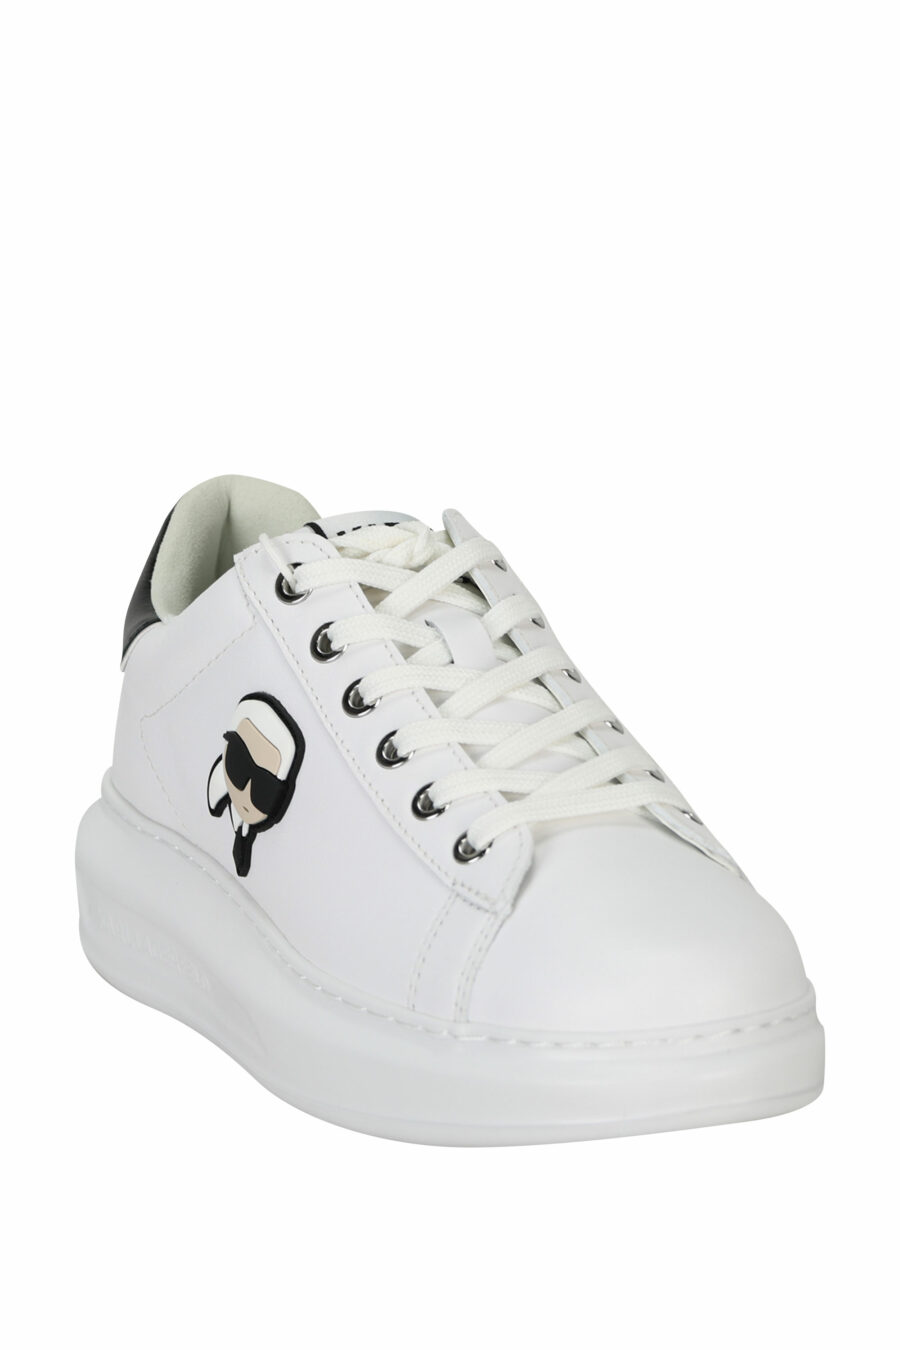 White "Kapri" trainers with rubber logo and black detail - 5059529351020 1